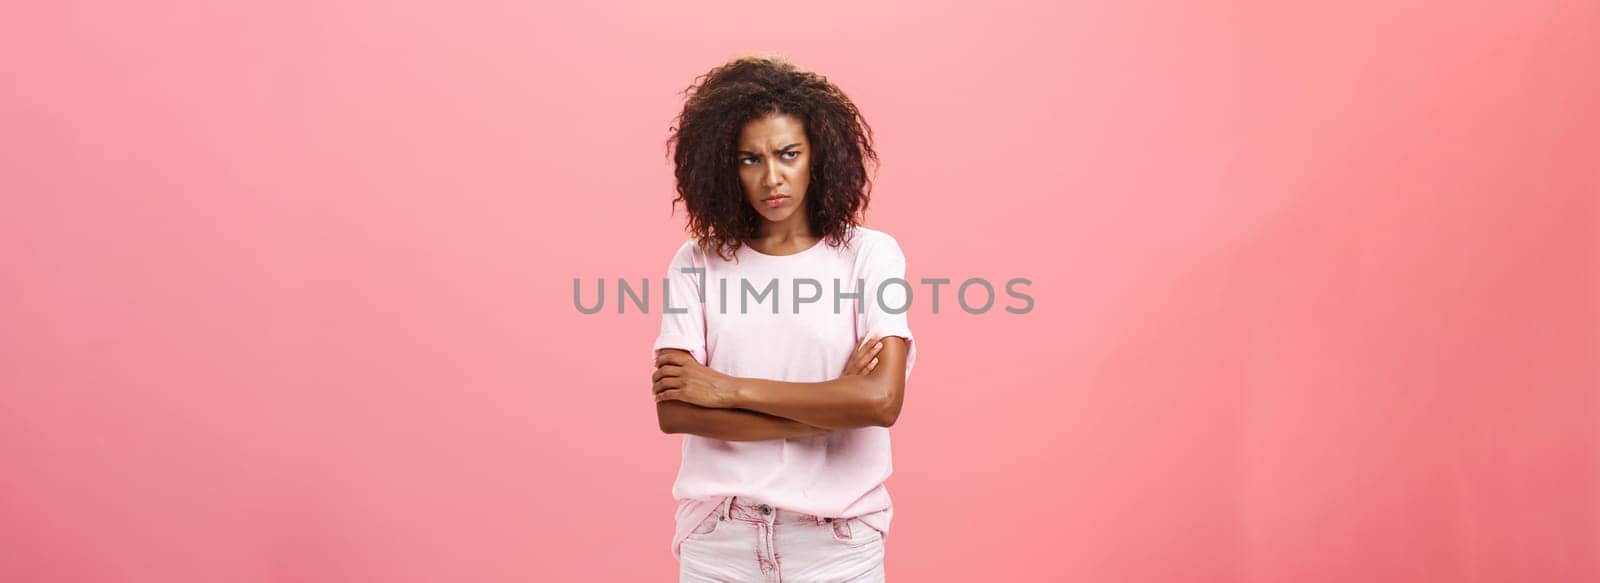 Portrait of offended gloomy sad african american female friend crossing arms on chest in protection gesture frowning looking from under forehead with insult looking envious and angry over pink wall. Lifestyle.